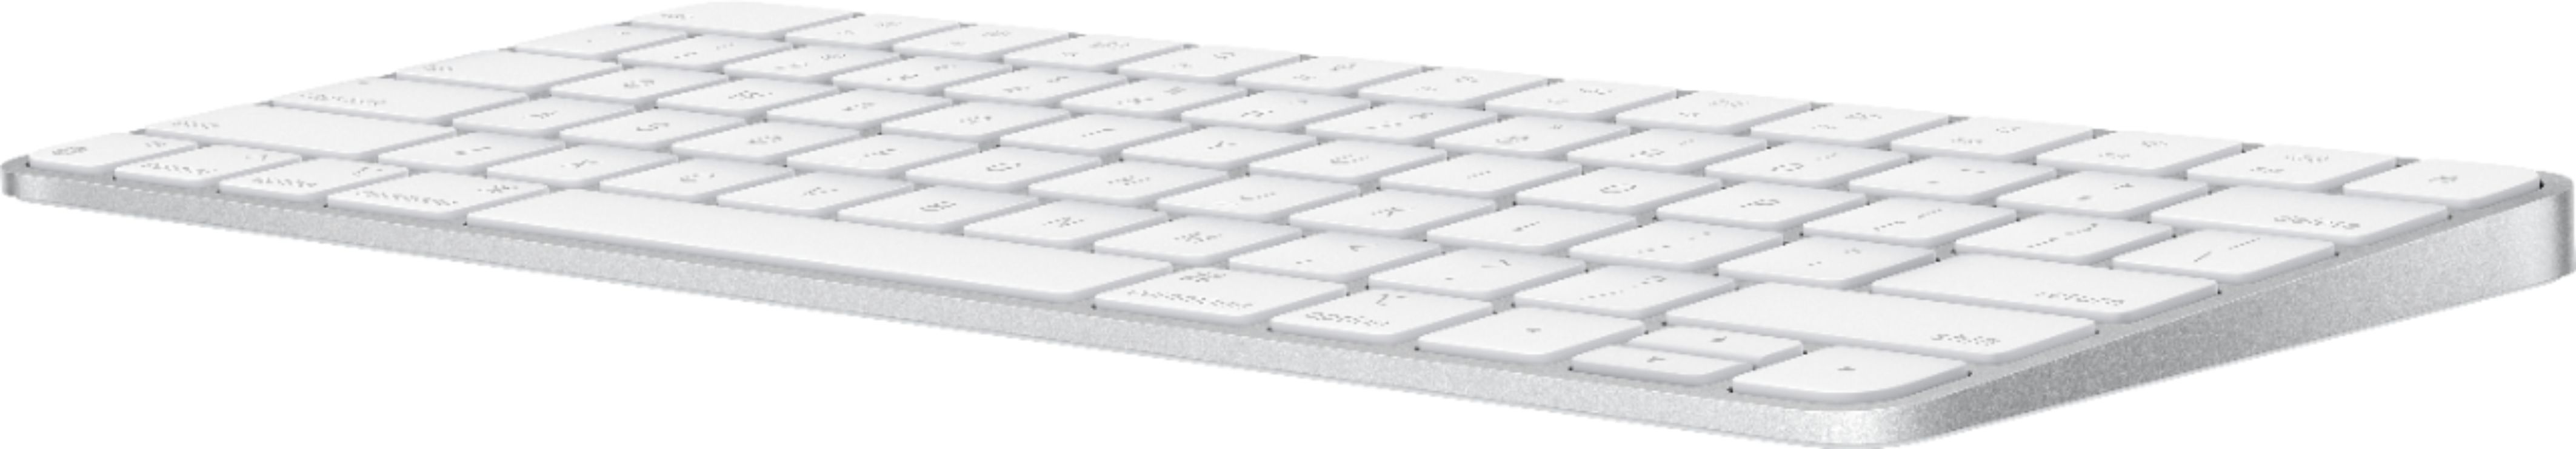 PC/タブレット タブレット Apple Magic Keyboard MK2A3LL/A - Best Buy